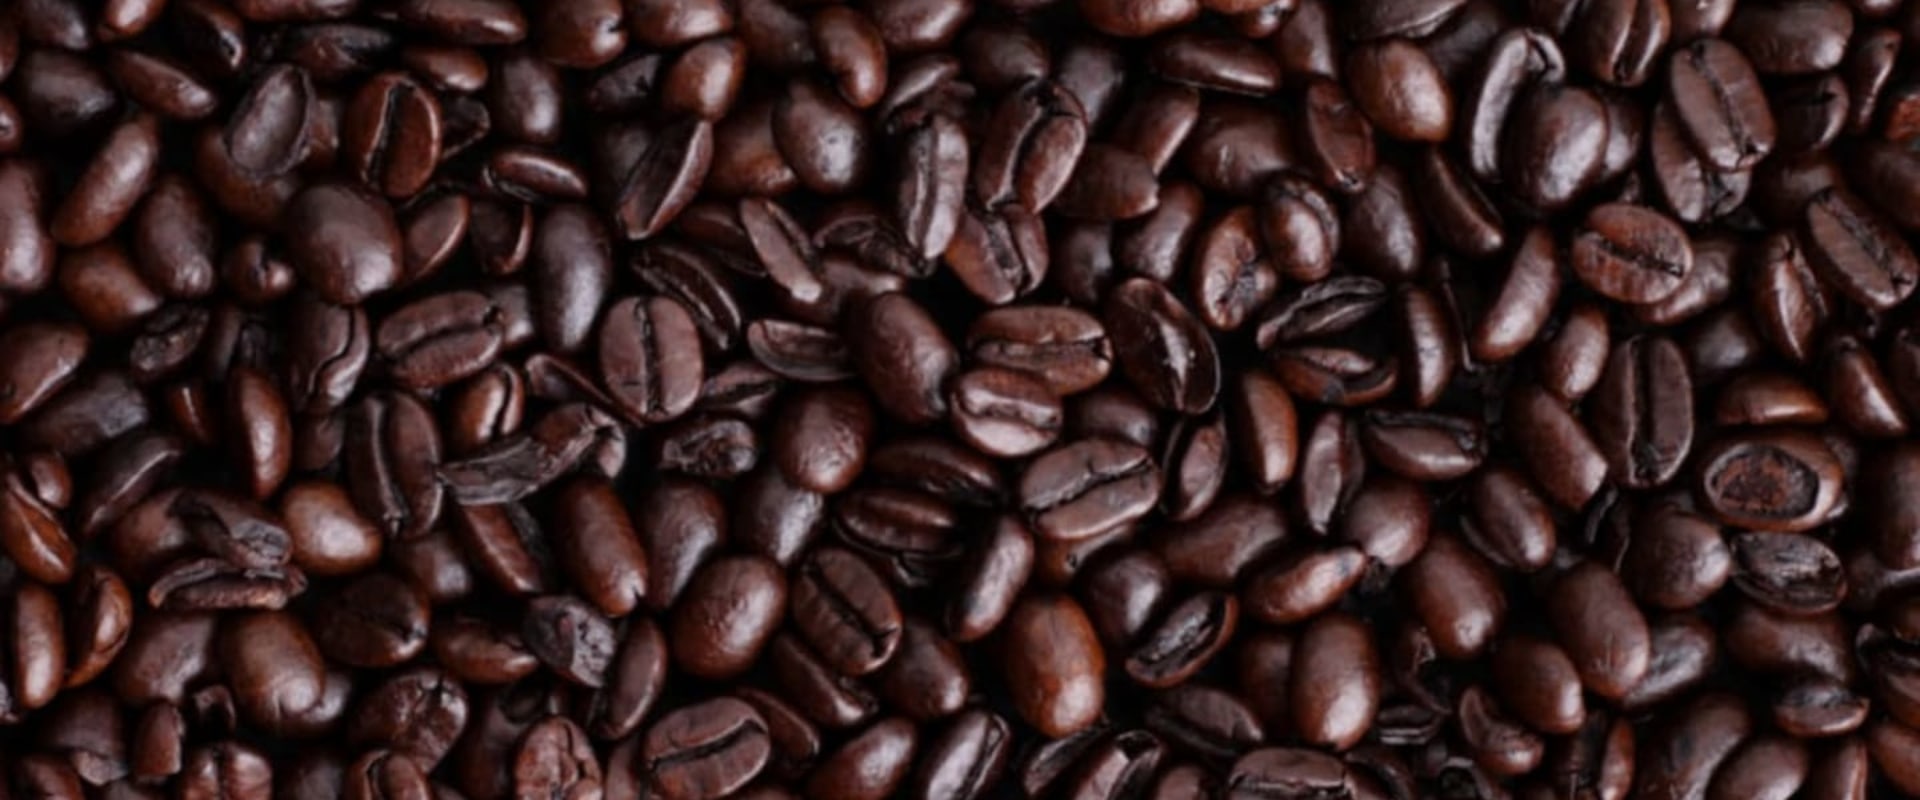 The History of Coffee: From Ethiopia to Europe